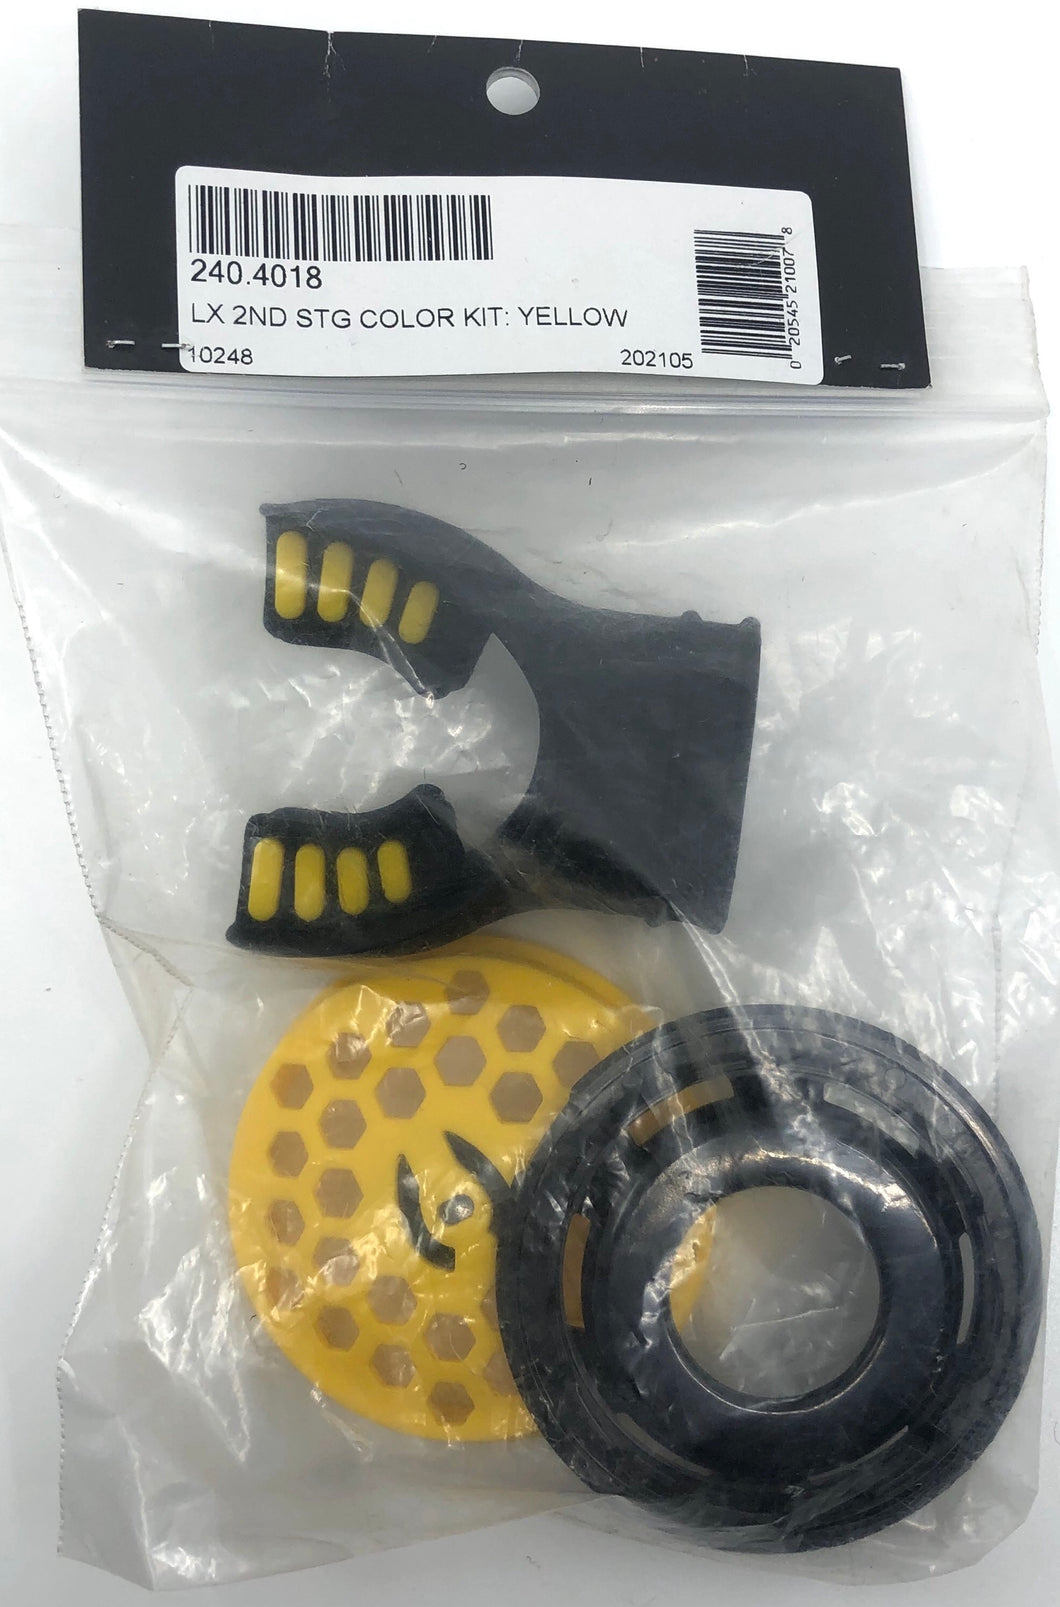 Hollis LX 2ND STAGE COLOR KIT: YELLOW 240.4018